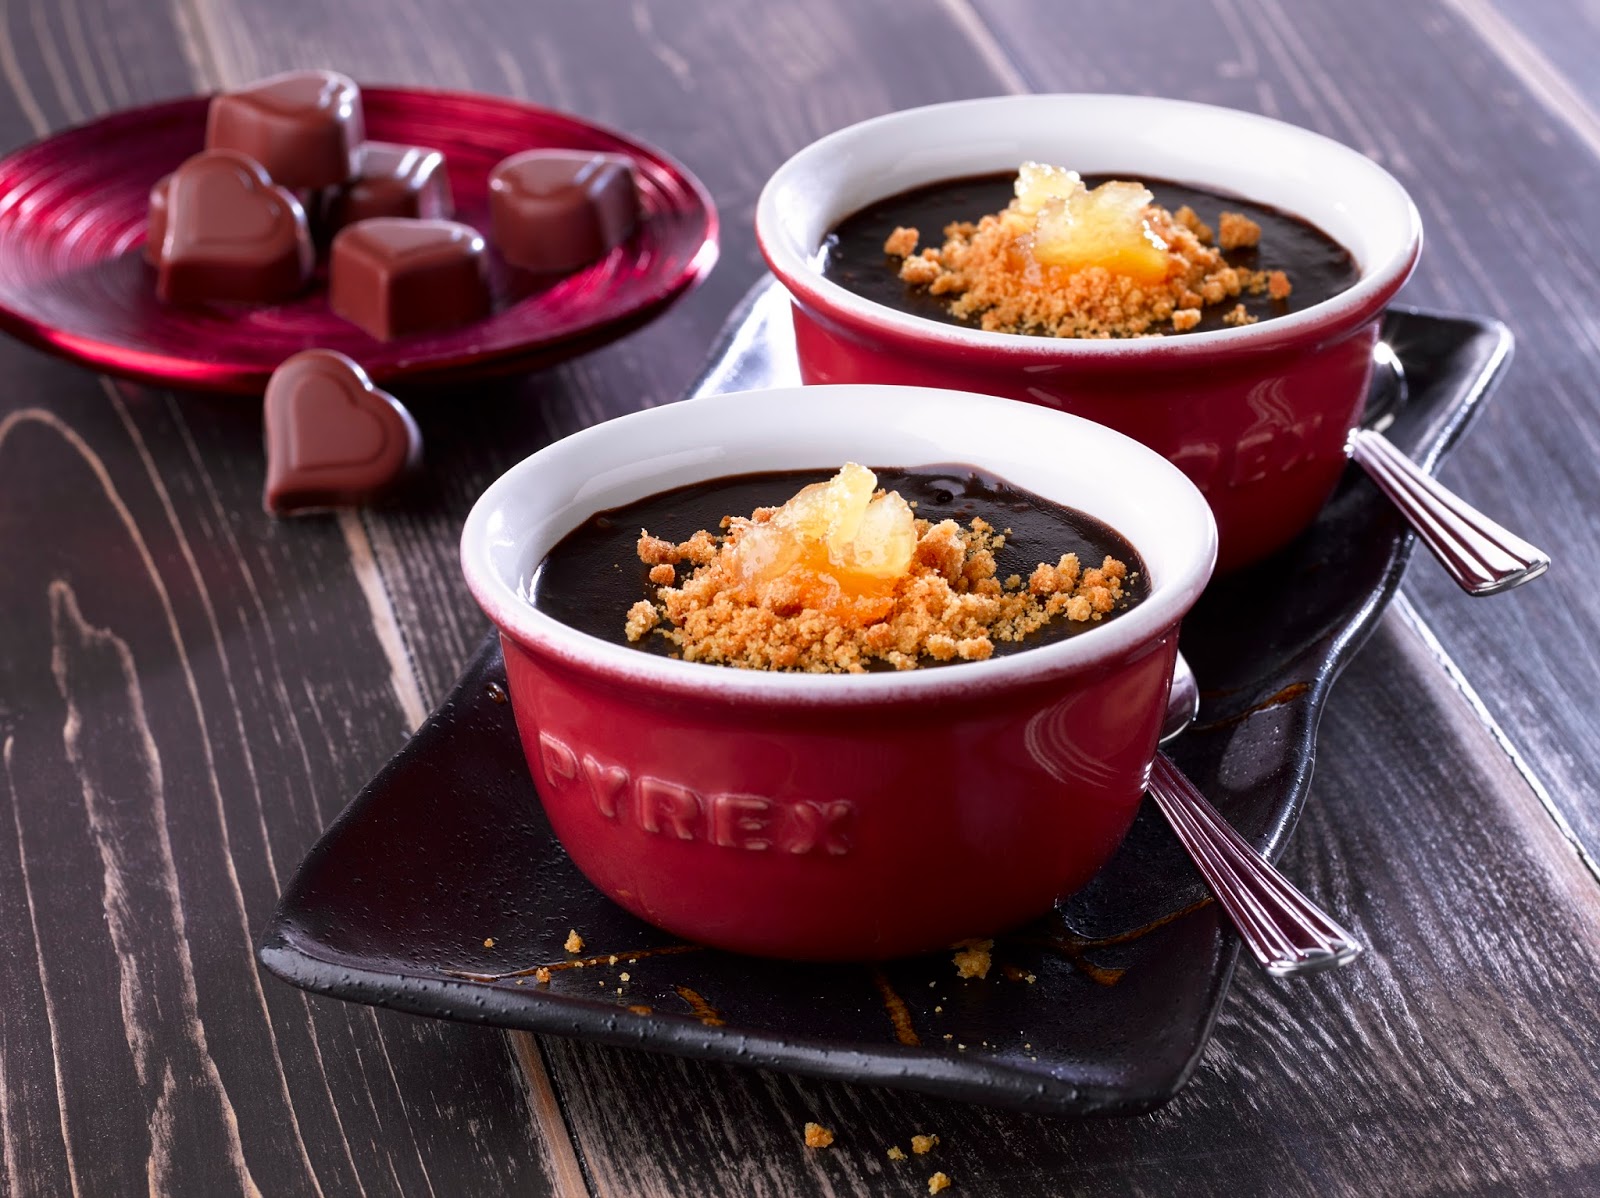 Ginger And Chocolate Pot: Valentine’s Treat